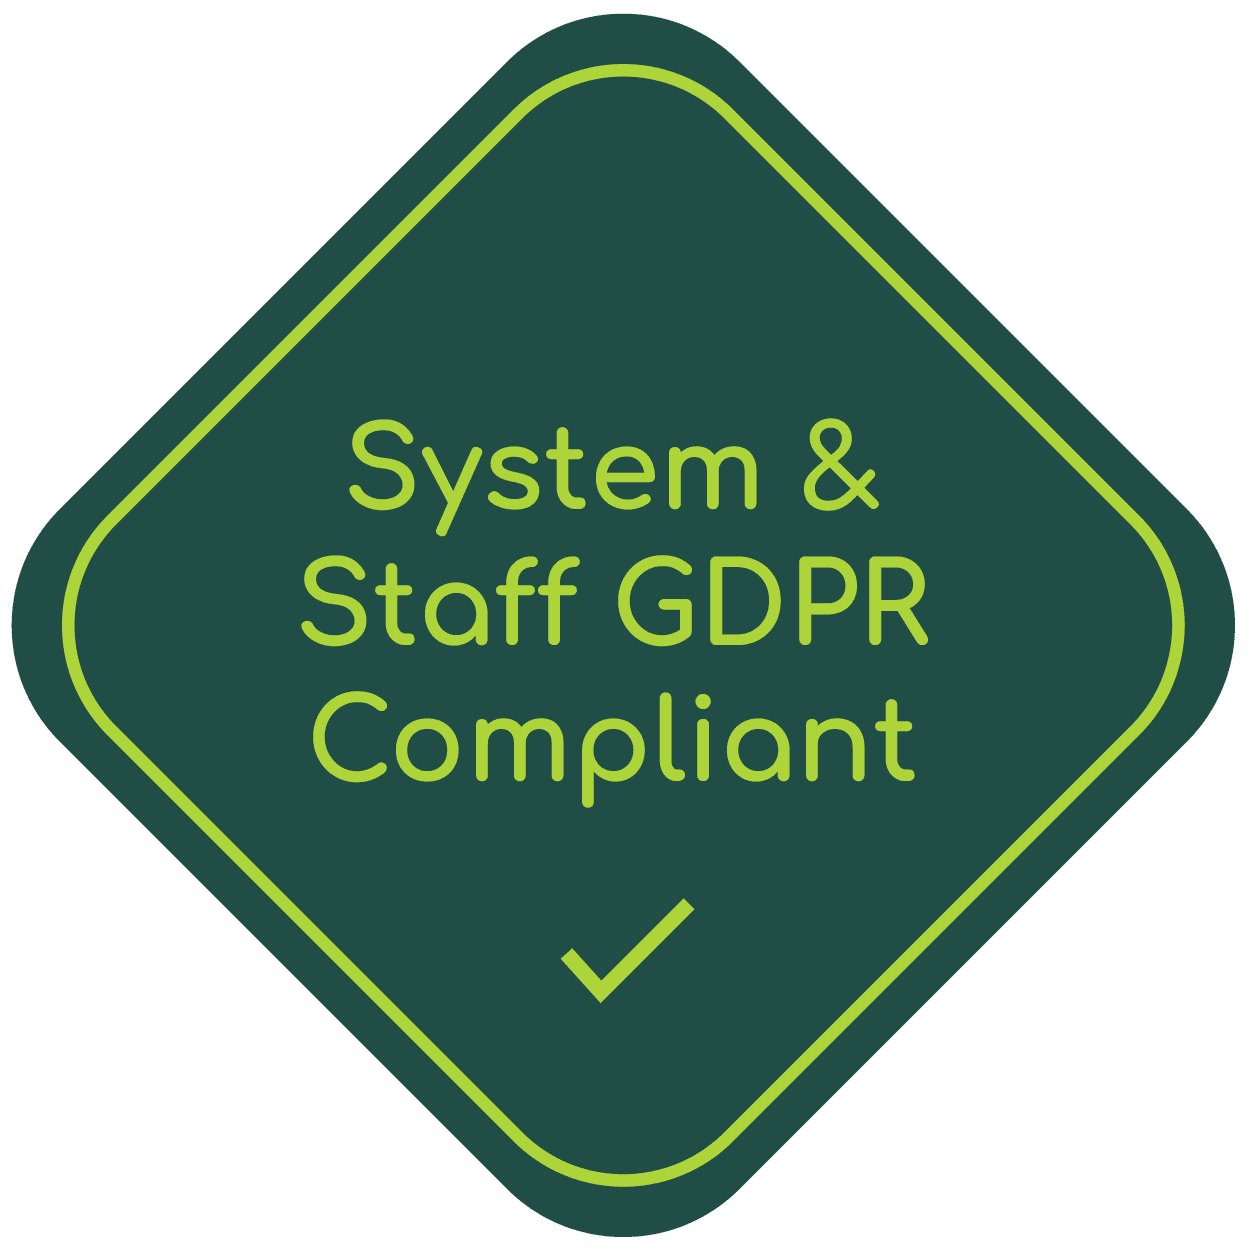 GDPR system and staff compliant for Licence & Grey Fleet Checks